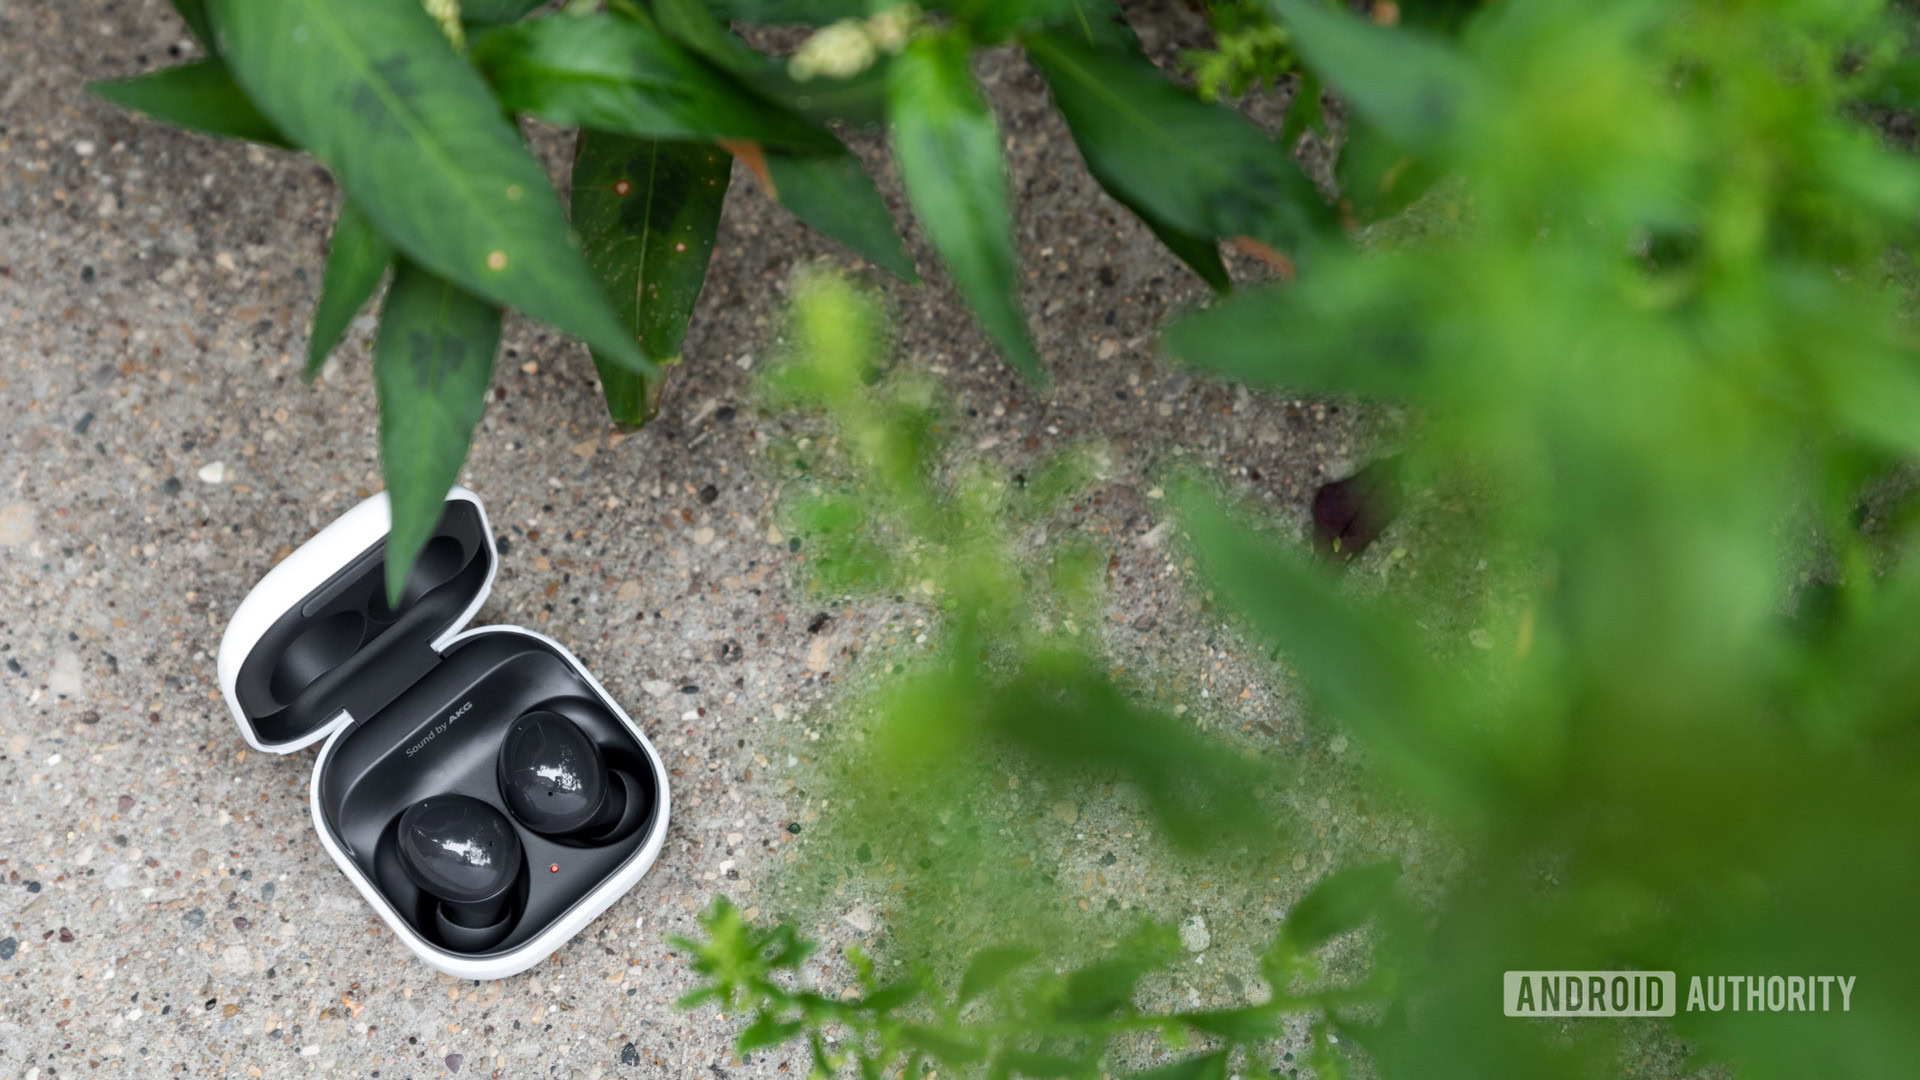 The Samsung Galaxy Buds 2 noise cancelling true wireless earbuds in the open charging case, partially obscured by greenery.